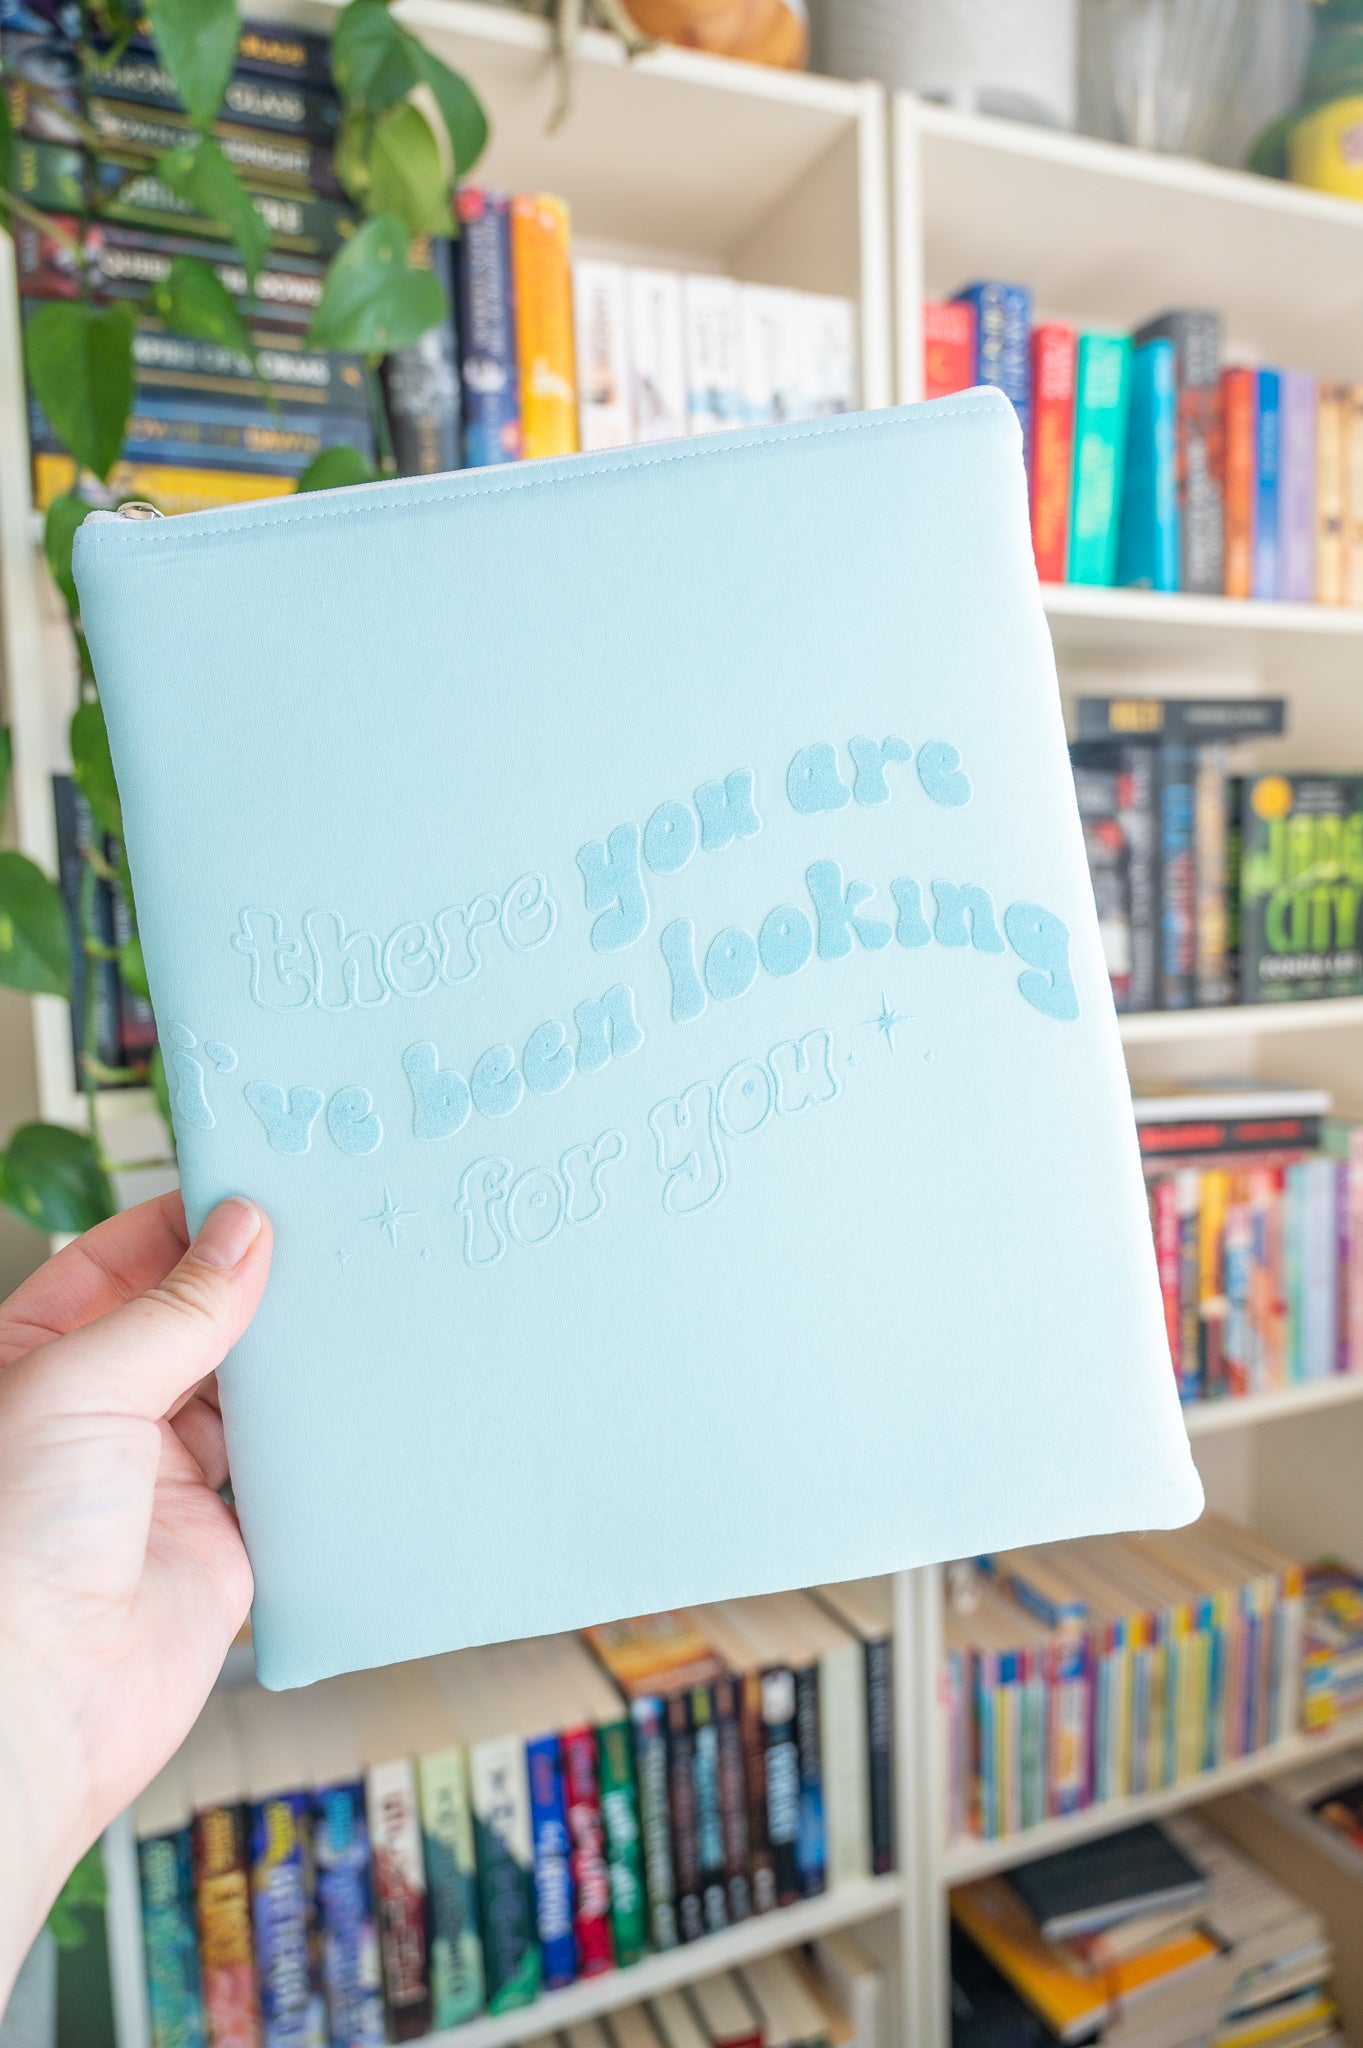 I've Been Looking For You Paperback Book Sleeve